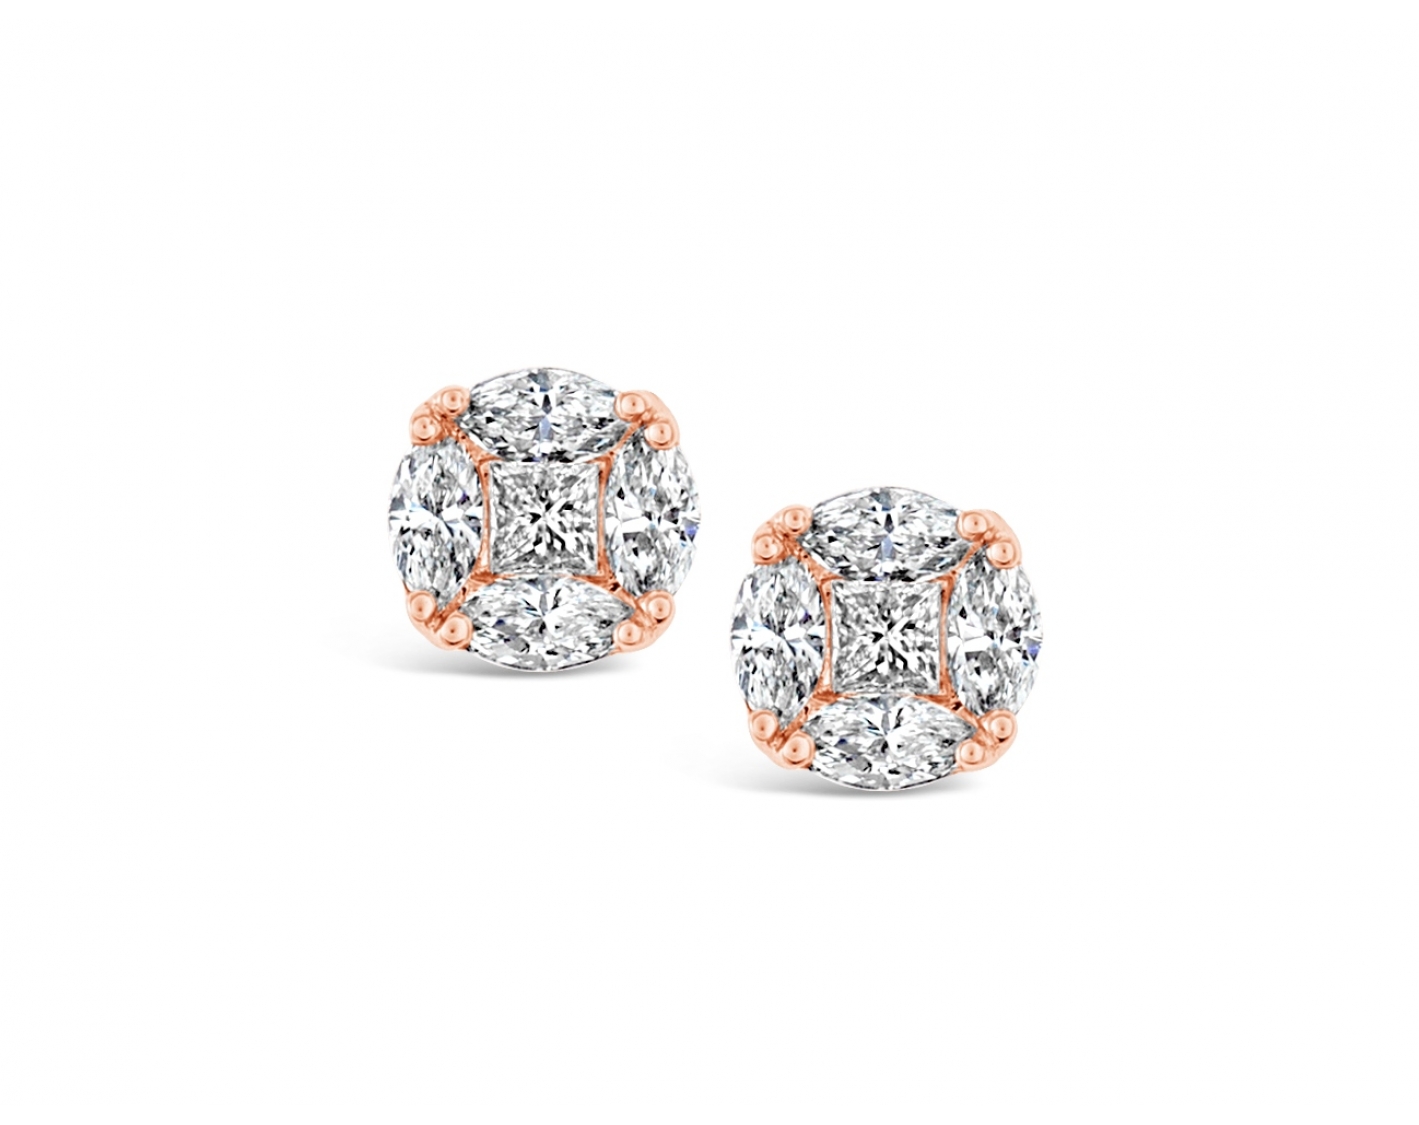 18k white gold illusion set stud earrings with princess & marquises diamonds Photos & images